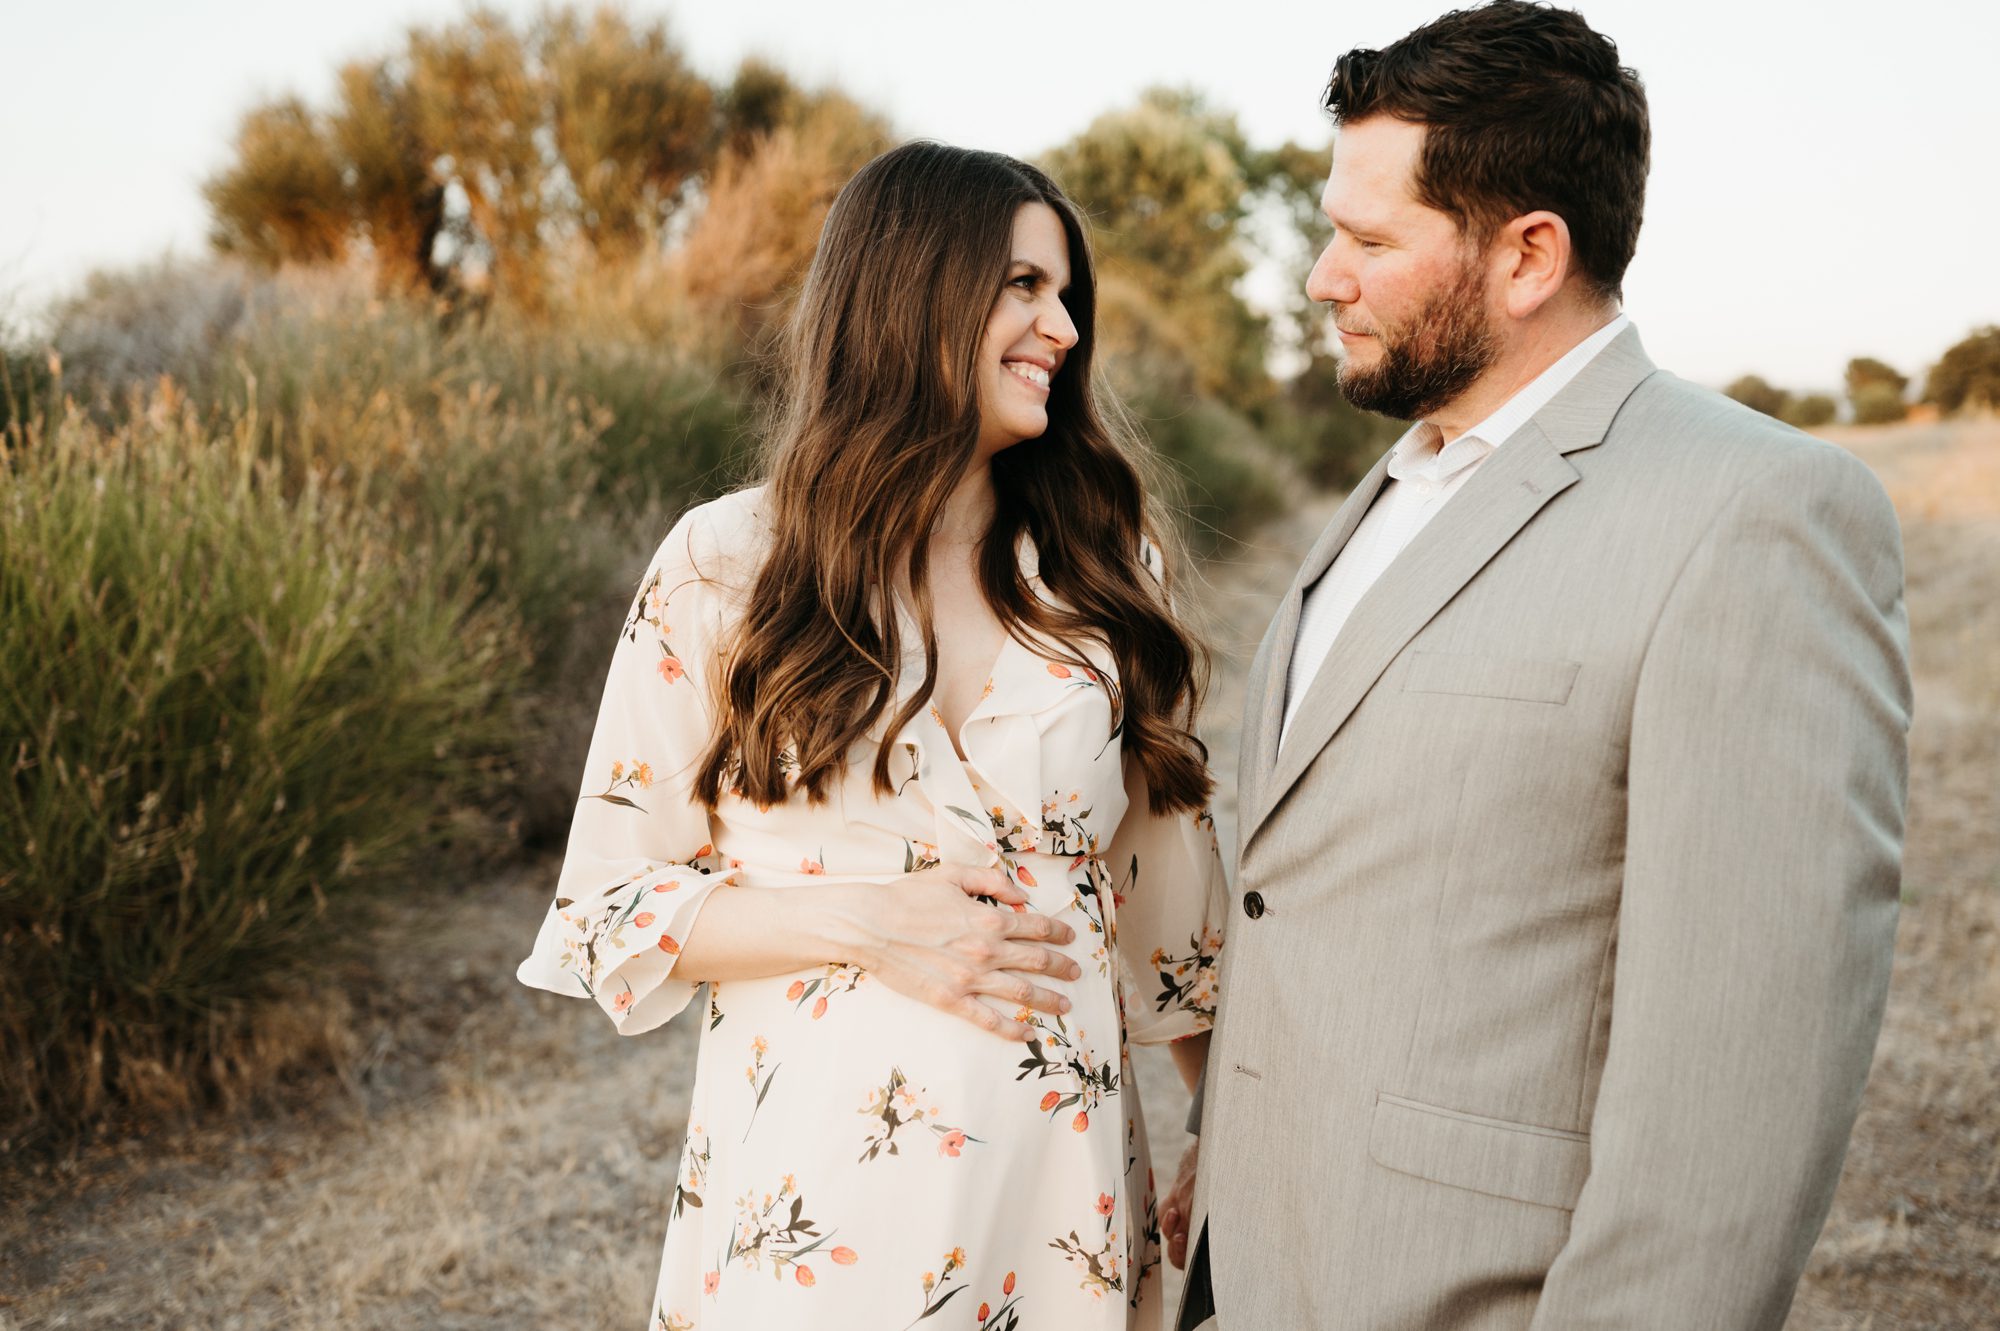 California maternity session by Briana Morrison Photography